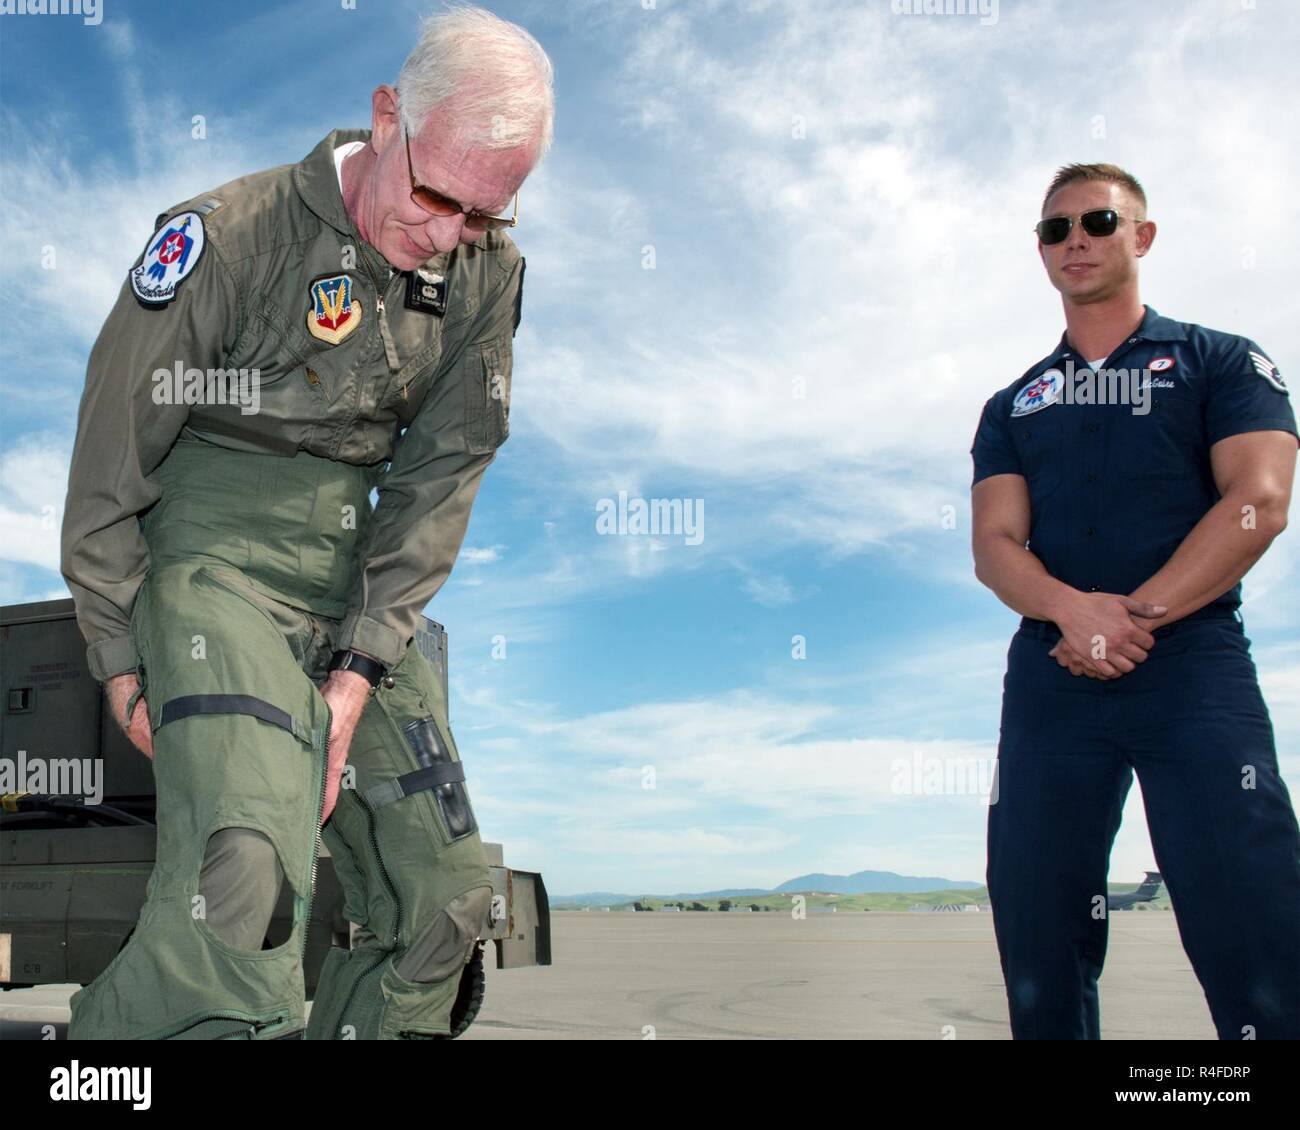 Former airline pilot Chesley “Sully” Sullenberger III puts on his G-suit before his flight with the United States Air Force Thunderbirds at Travis Air Force Base, Calif., May 4, 2017. Sullenberger is a 1973 Air Force Academy graduate and is best known for successfully landing a crippled airliner in the Hudson River saving the lives of a 155 passengers. Stock Photo